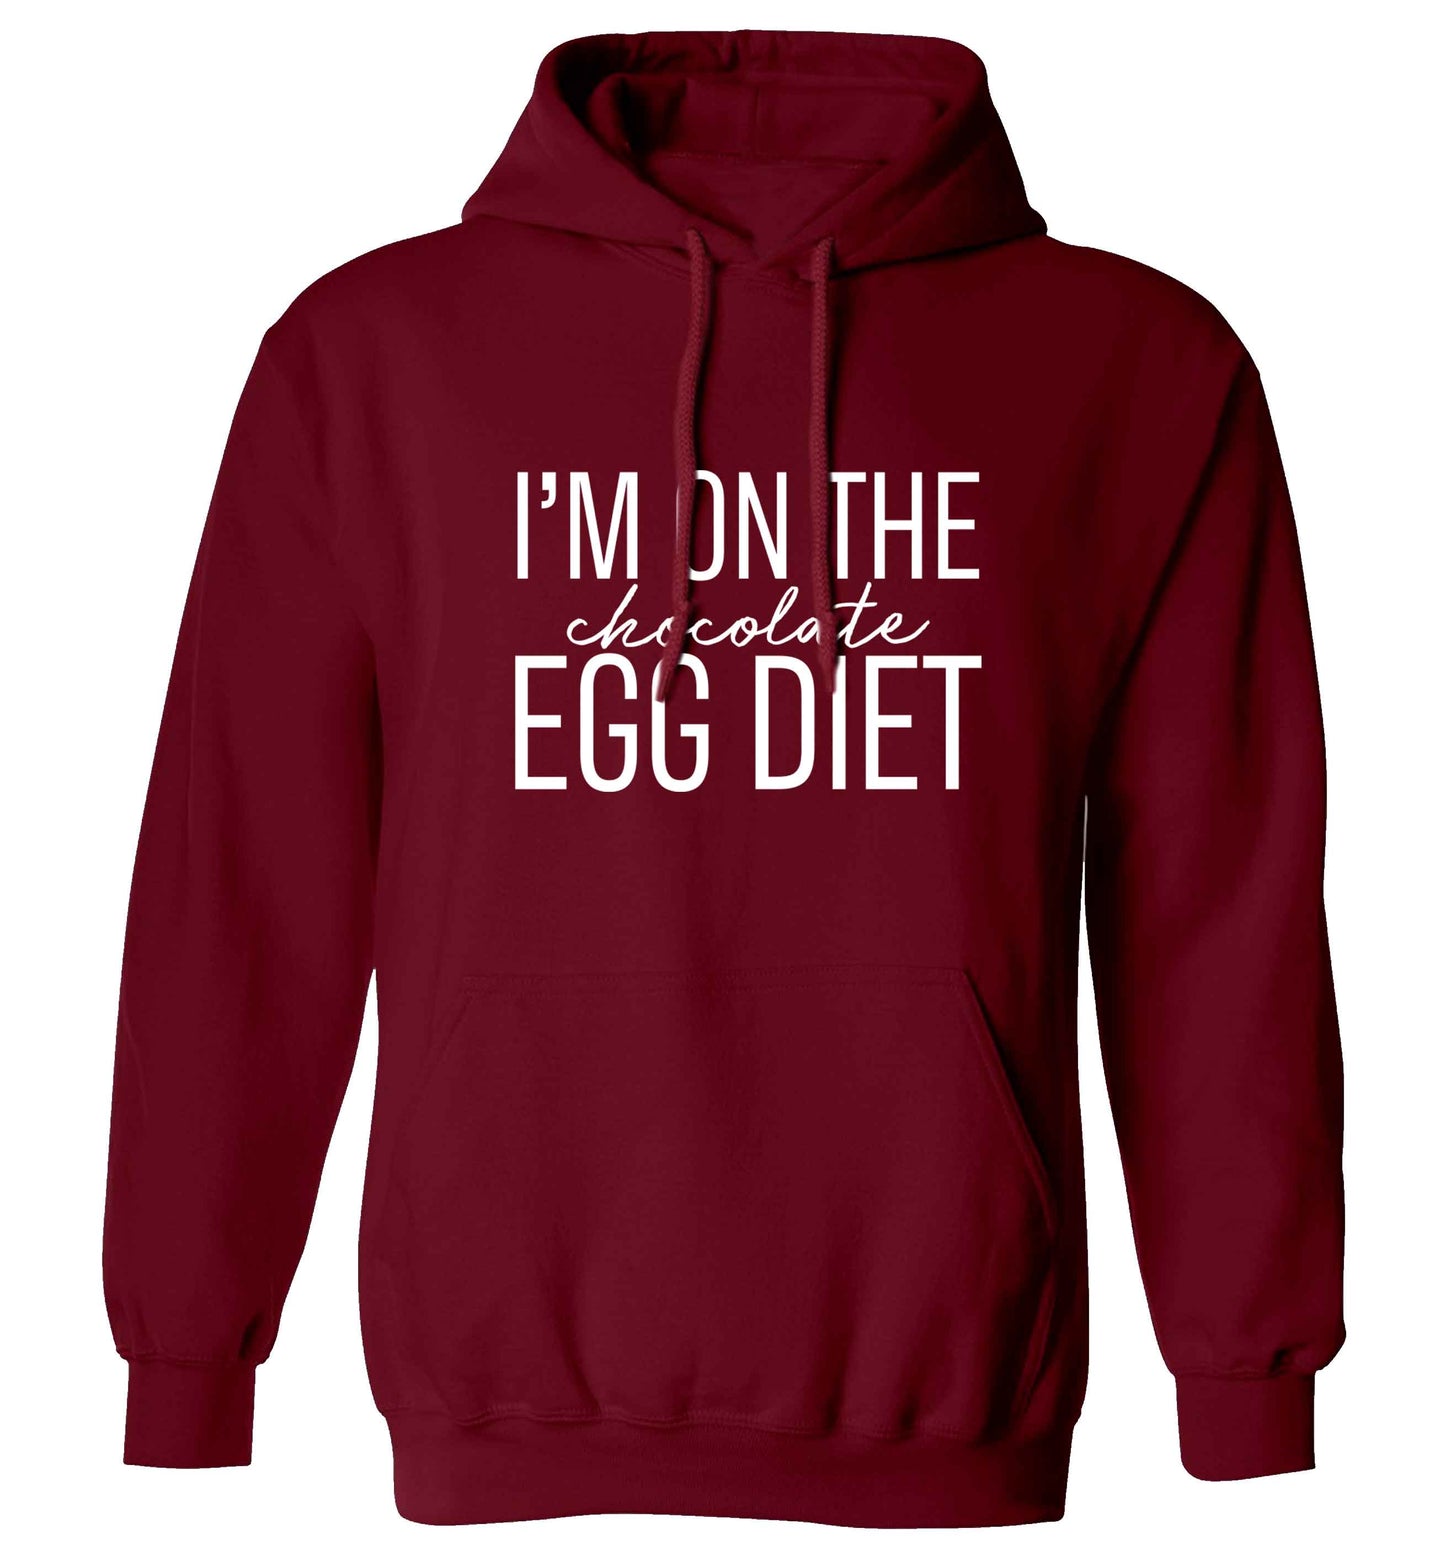 I'm on the chocolate egg diet adults unisex maroon hoodie 2XL